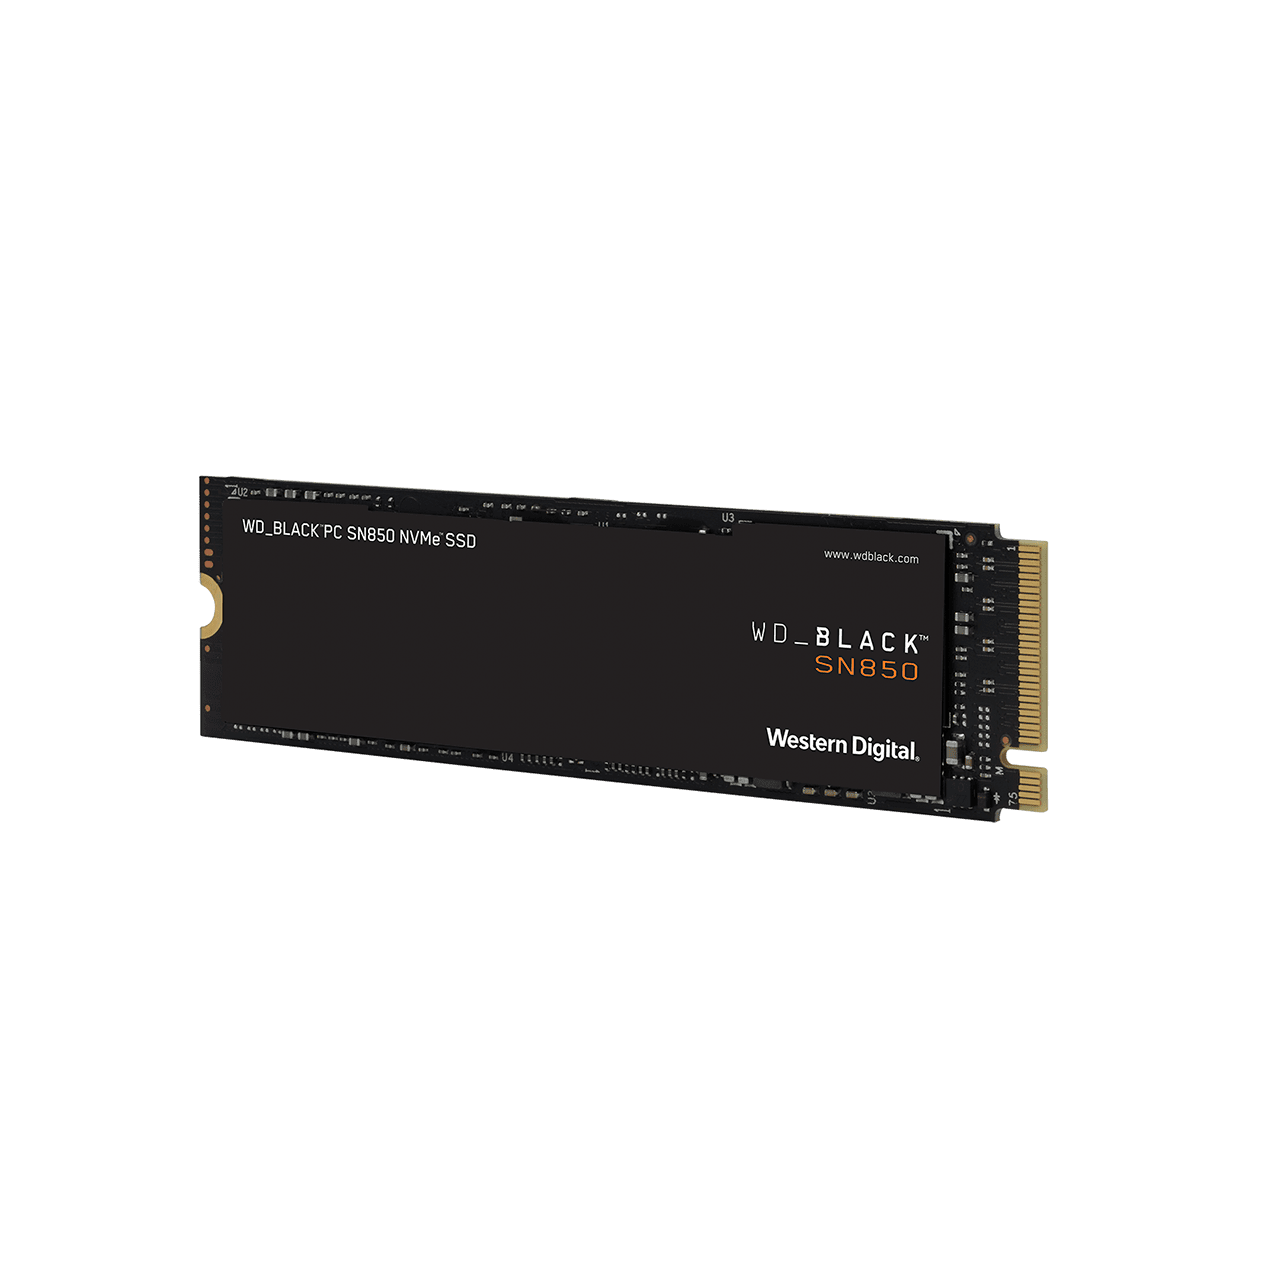 wd-black-sn850-nvme-ssd-side.png.thumb.1280.1280